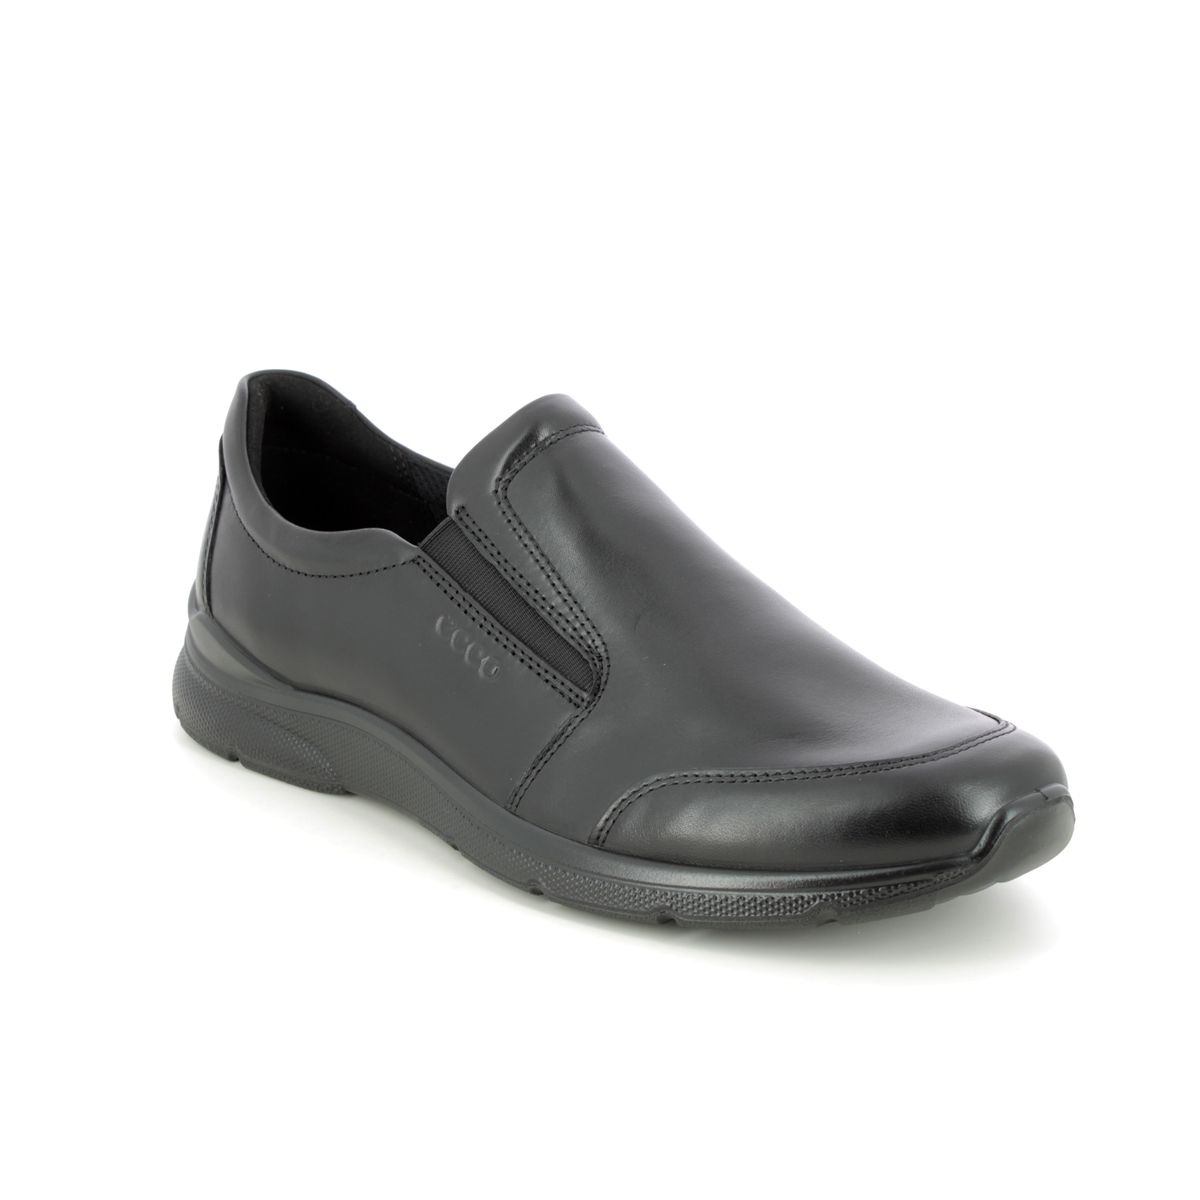 Ecco Irving Slip-On Black Leather Mens Slip-On Shoes 511684-11001 In Size 47 In Plain Black Leather